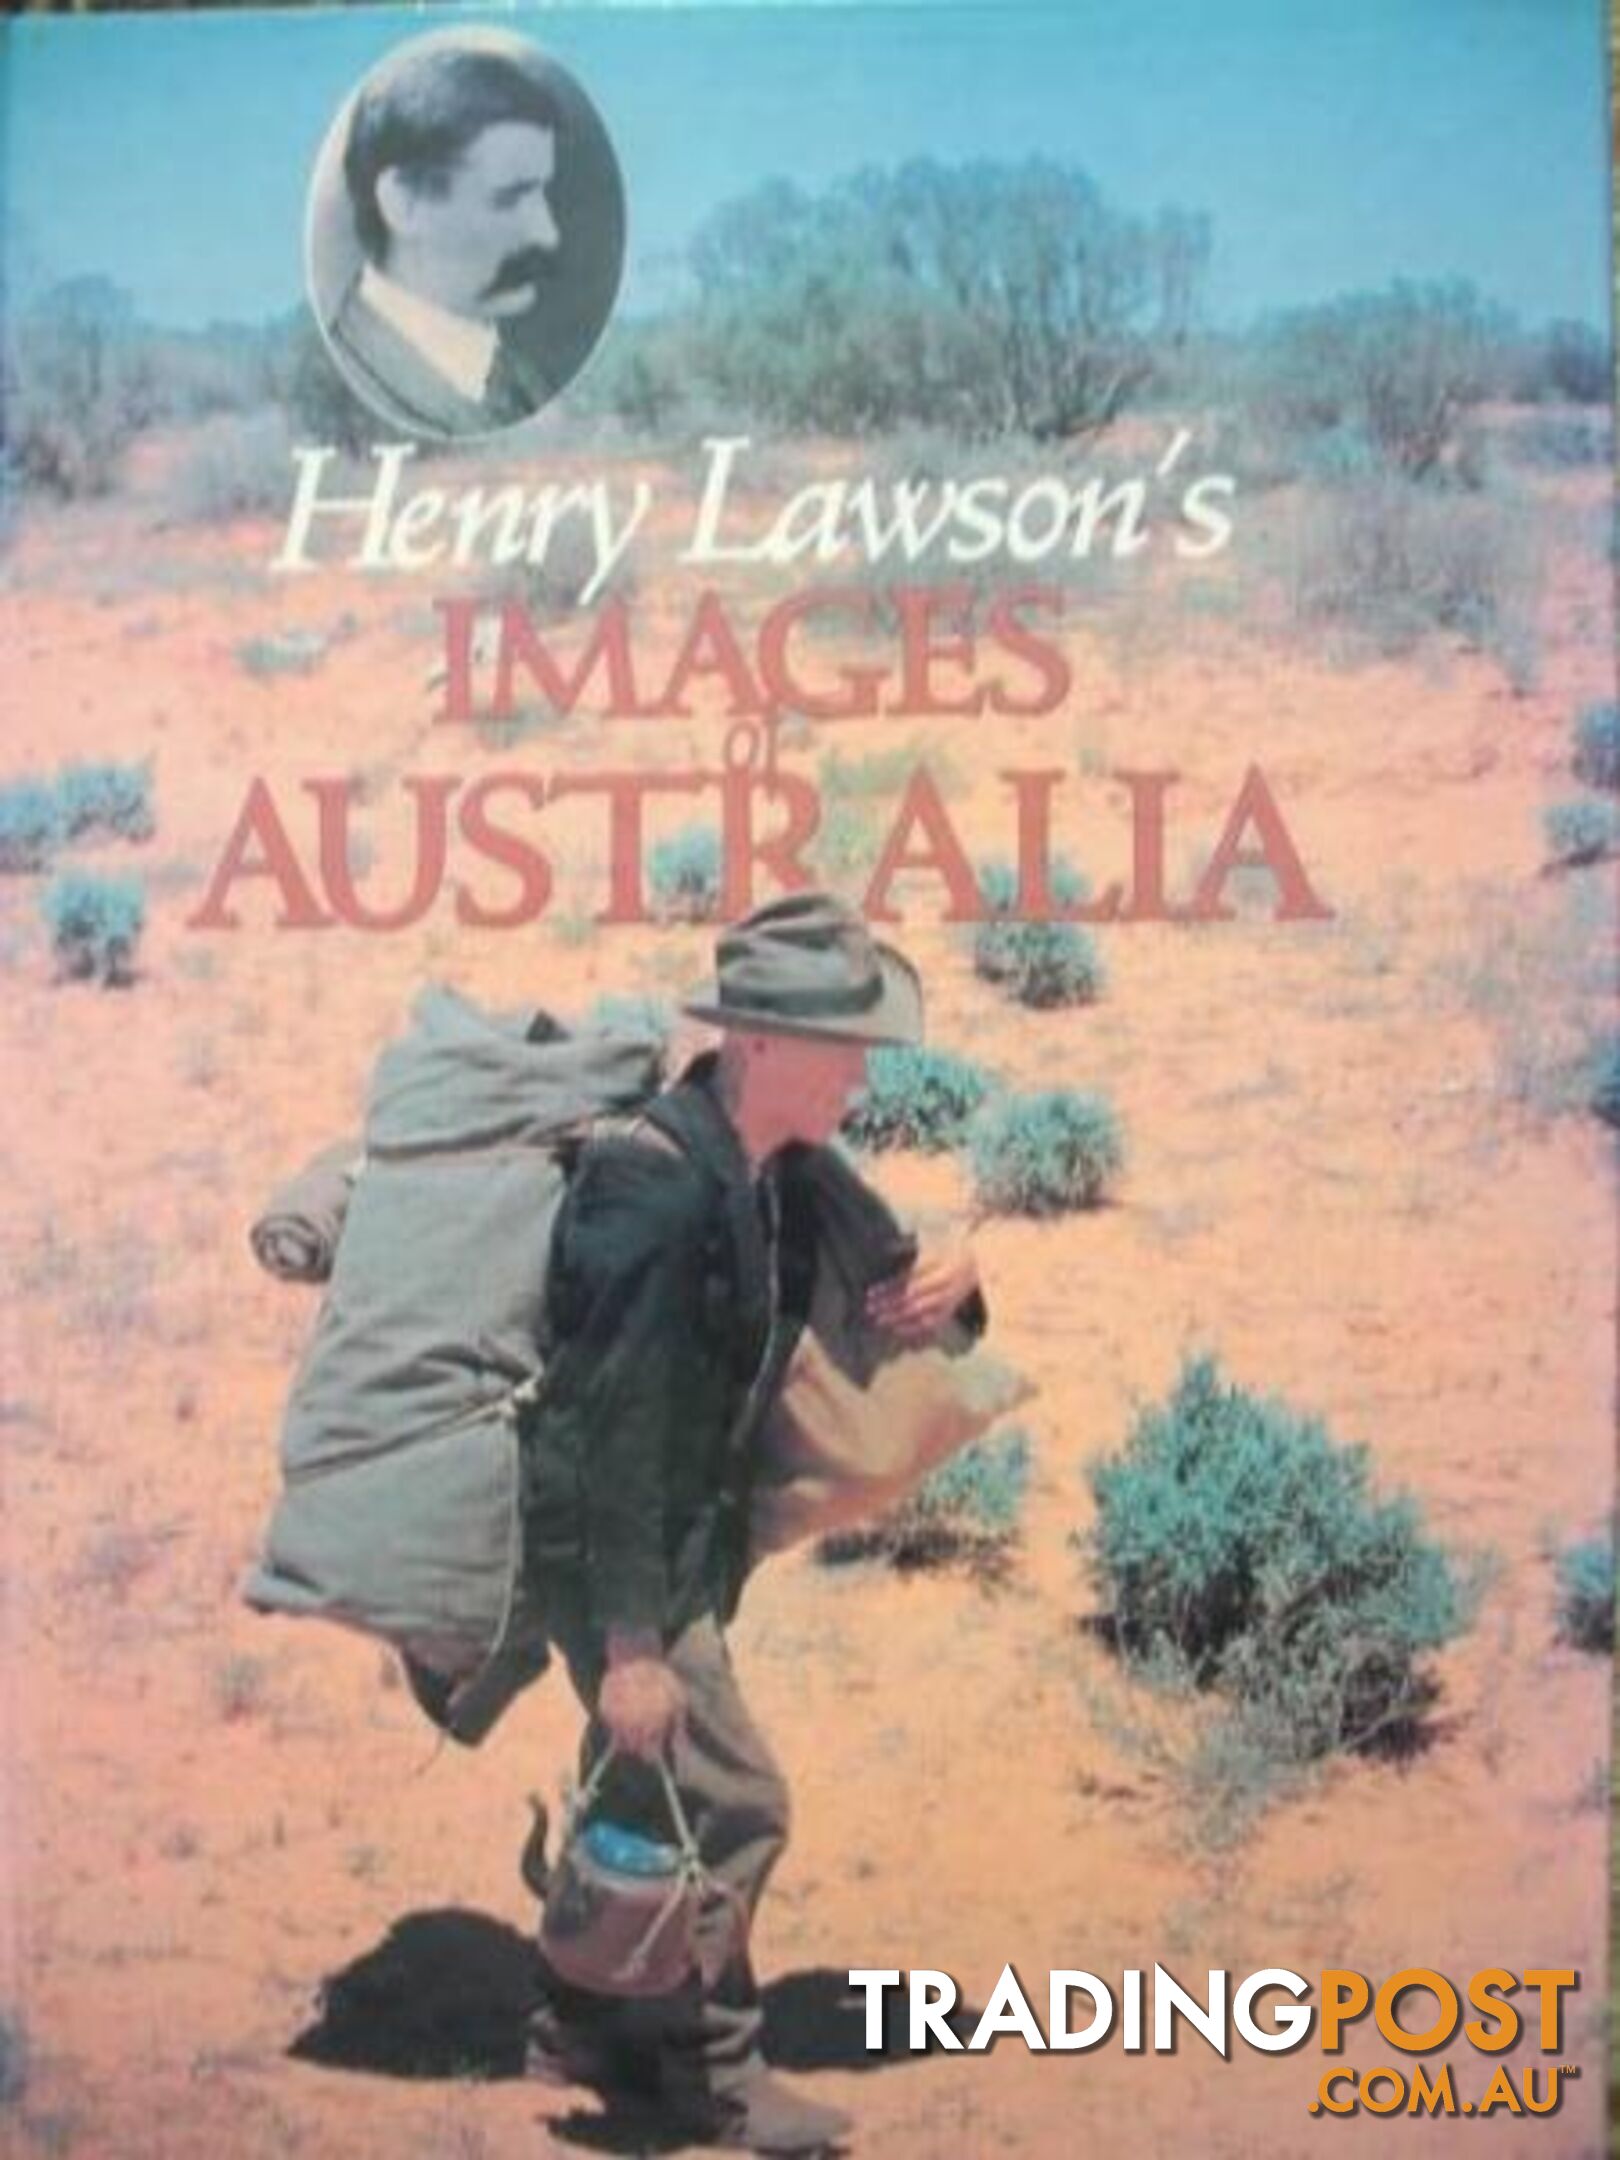 HENRY LAWSON'S IMAGES OF AUSTRALIA - HENRY LAWSON